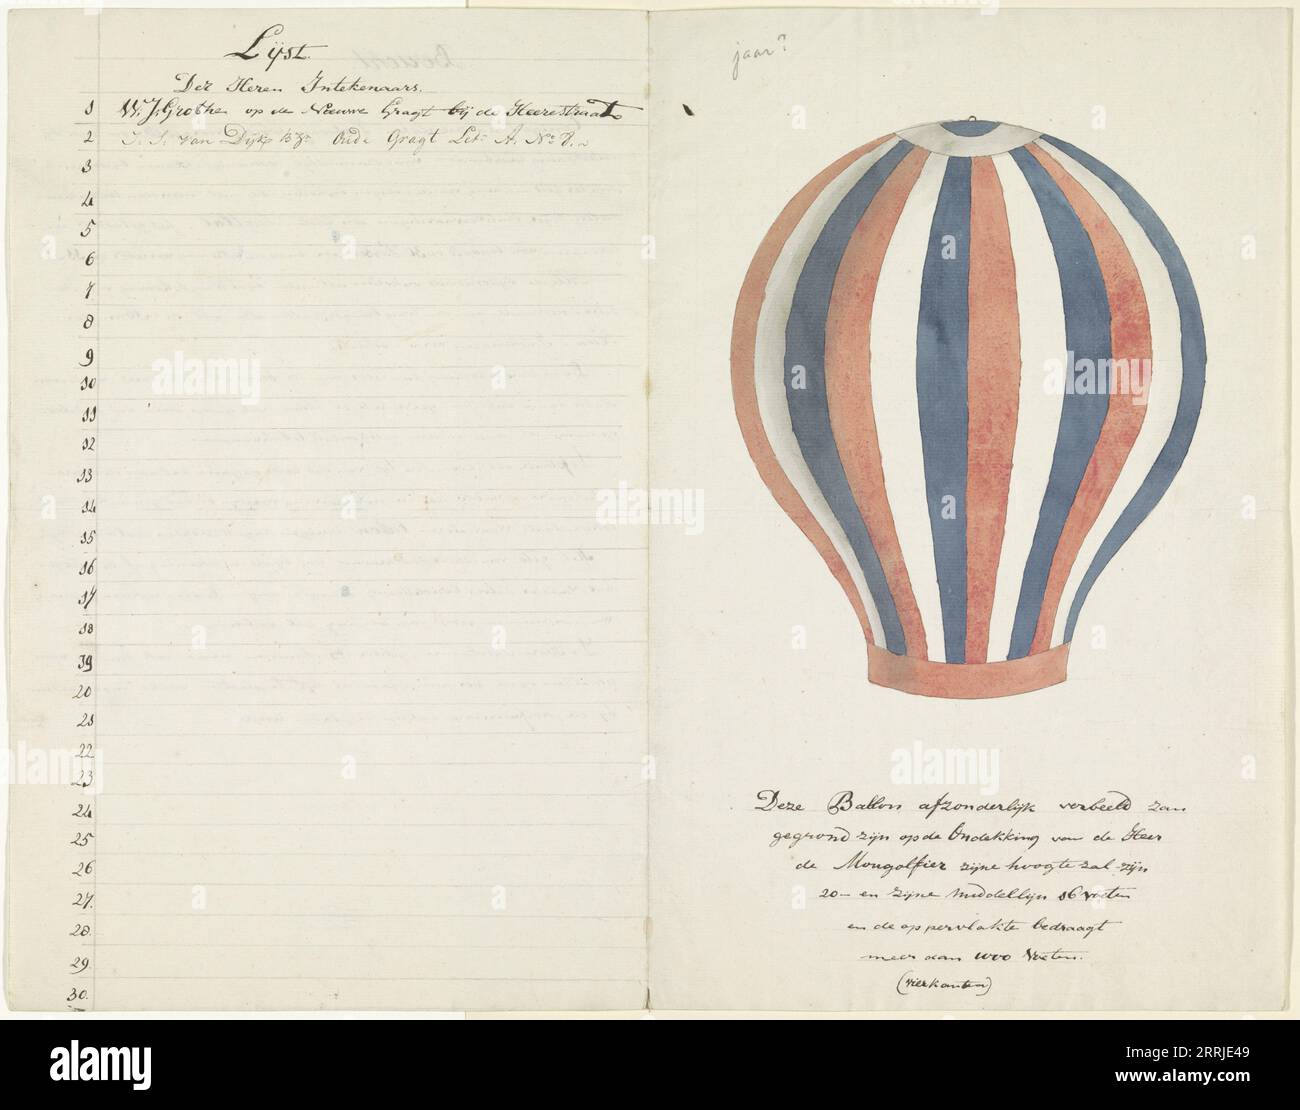 Air balloon and list of subscribers, 1700-1800. Stock Photo